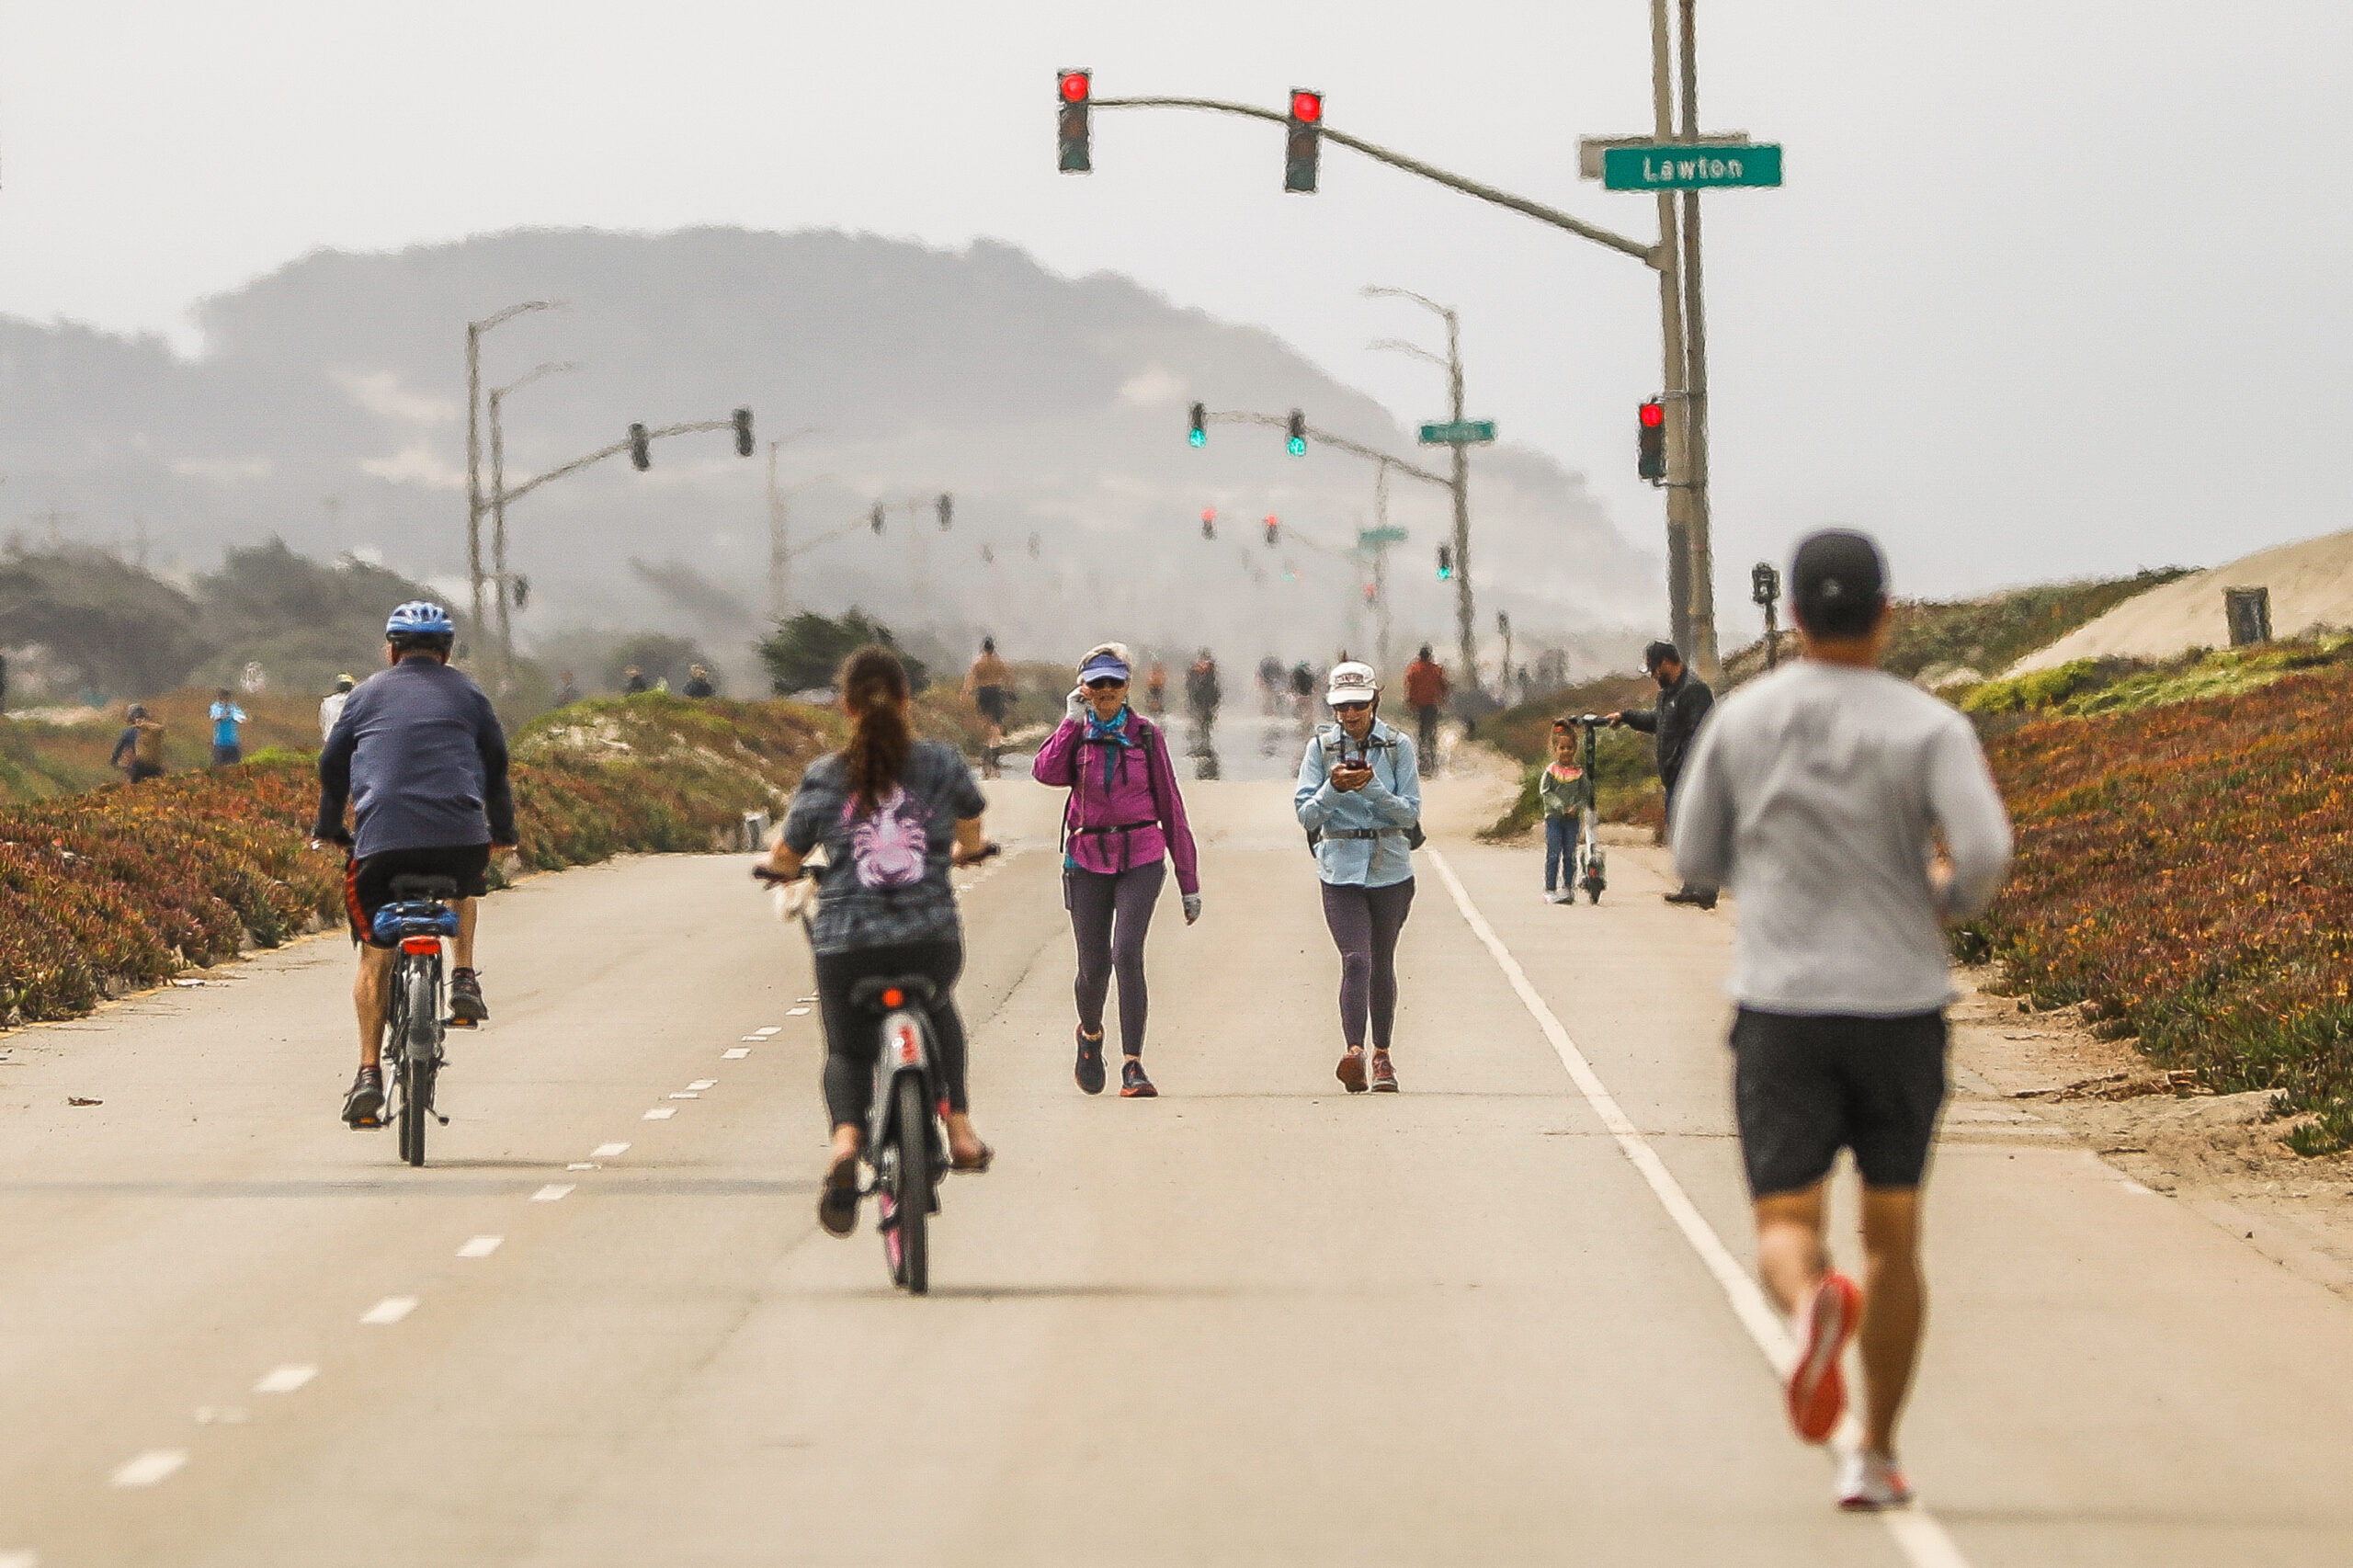 A road filled with cyclists, pedestrians, and runners, traffic lights overhead, and misty hills in the distance.